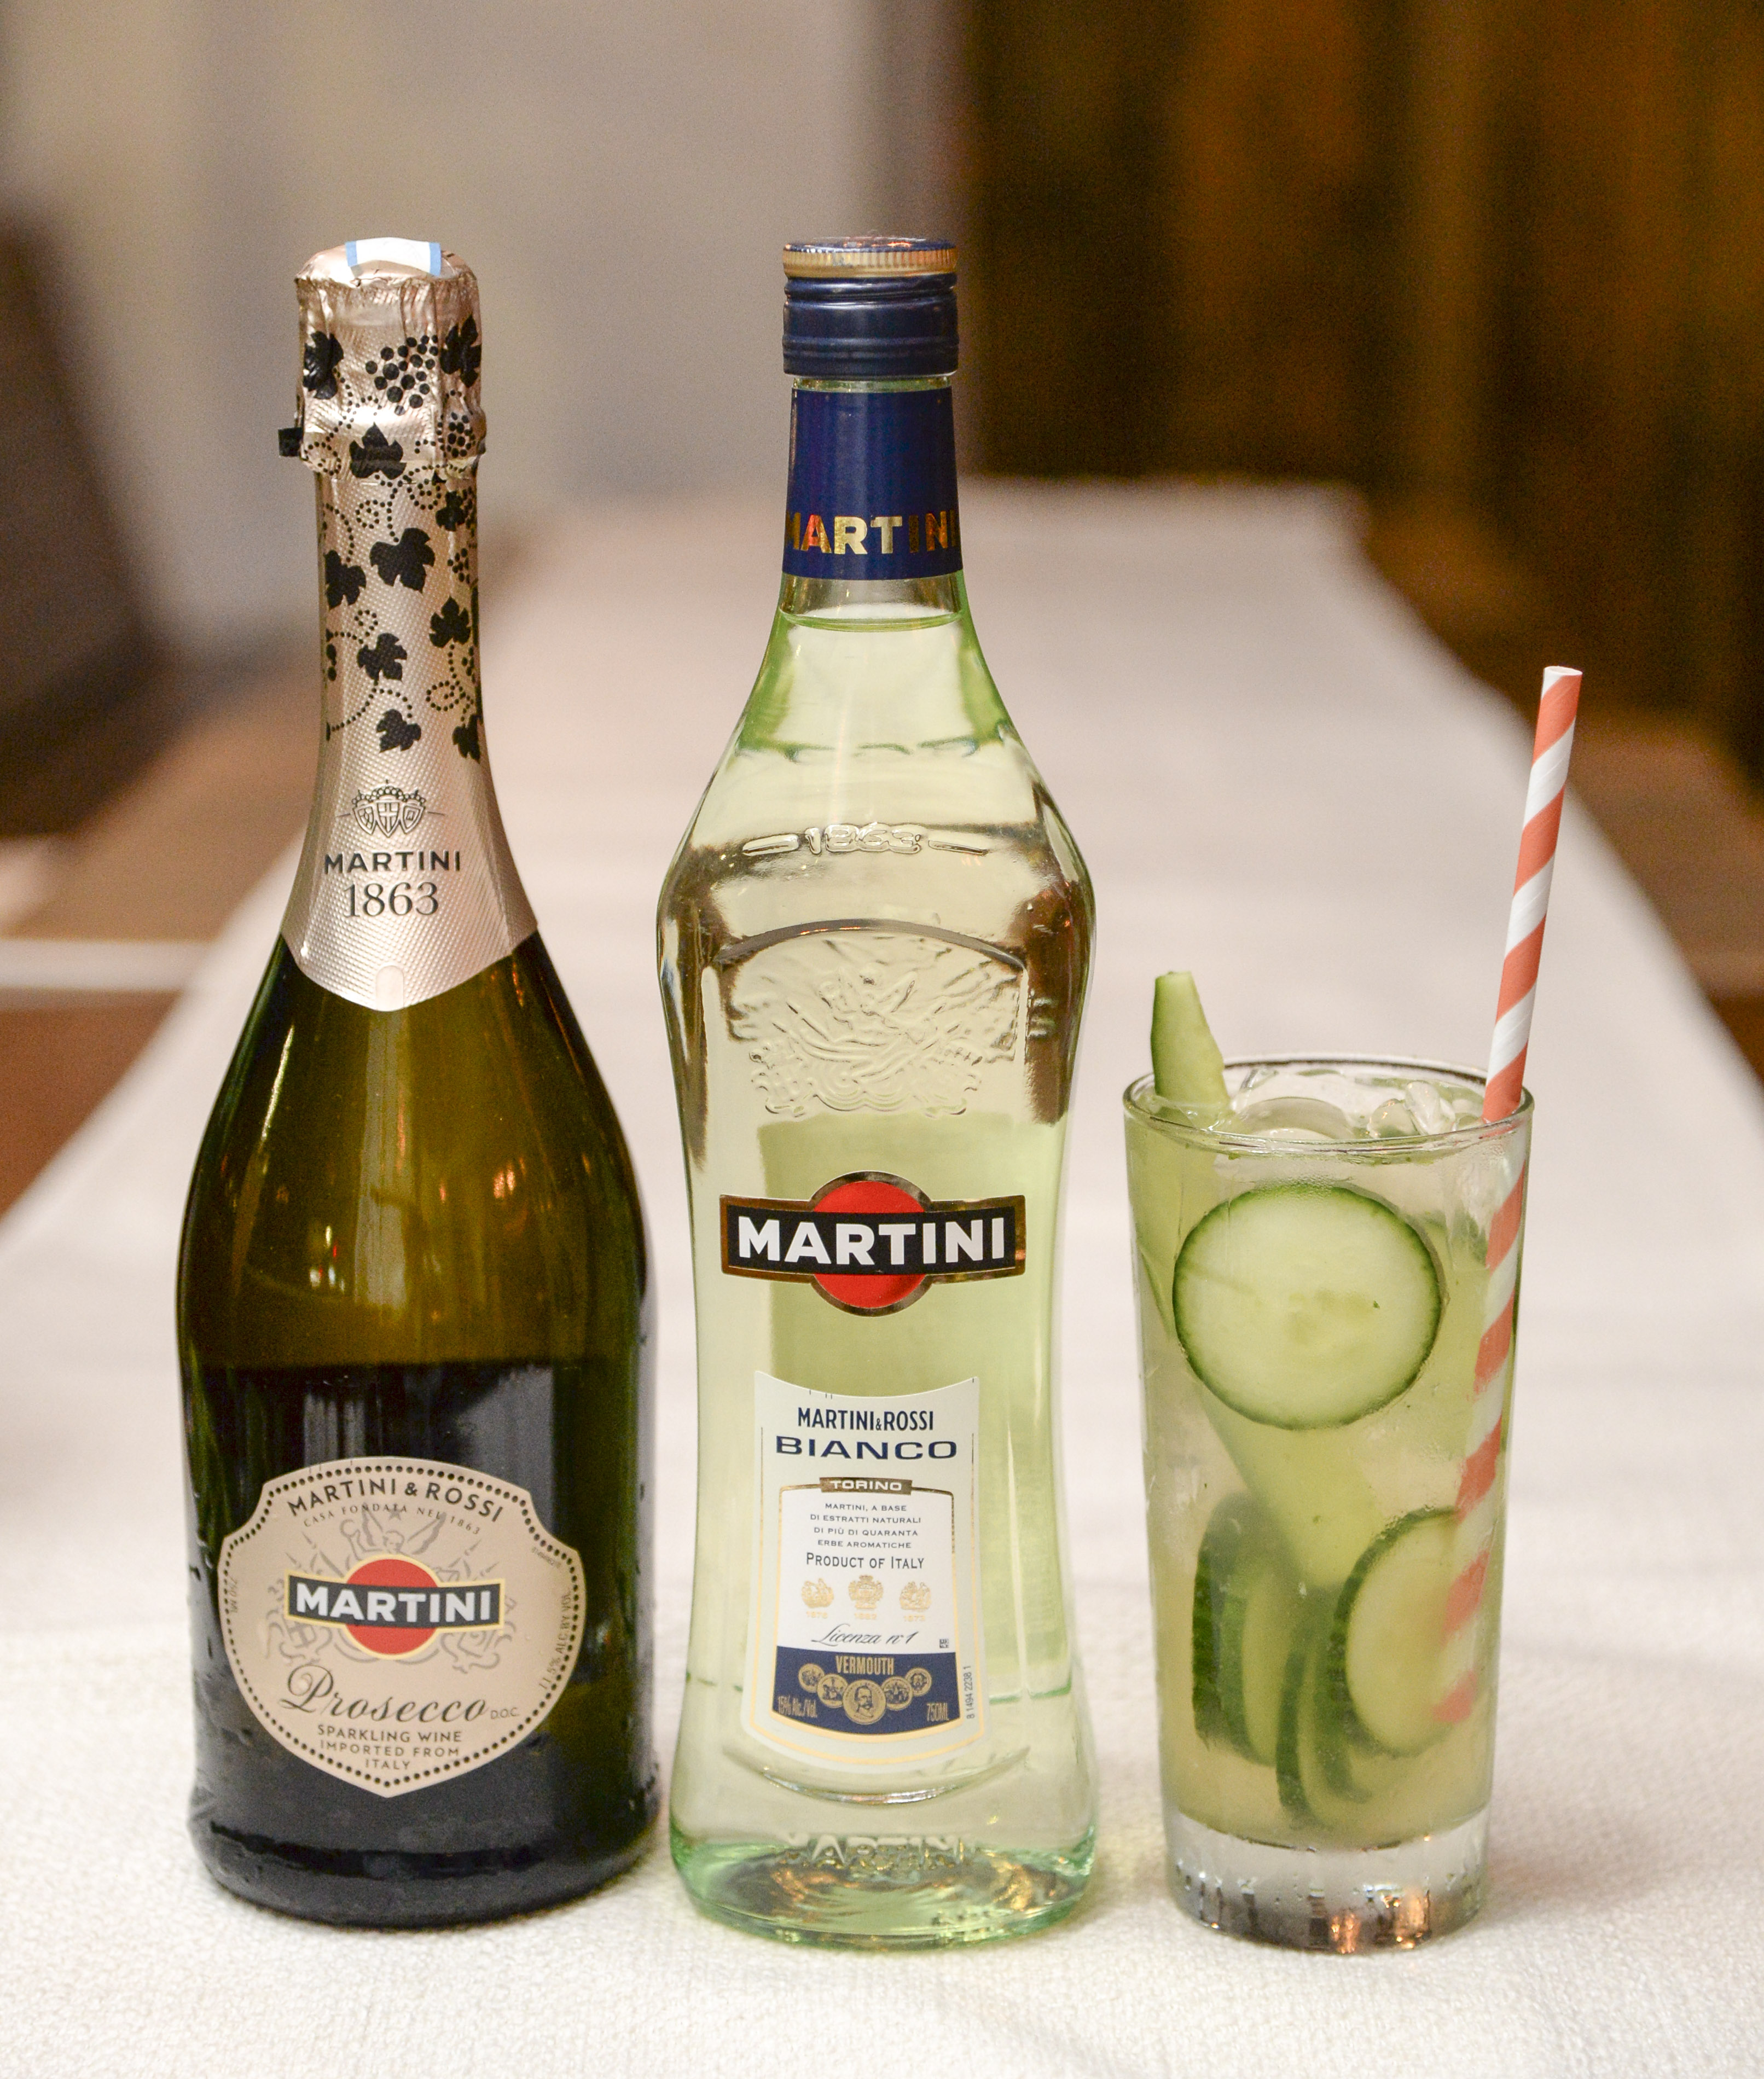 Whitney Port’s Bridal Shower with MARTINI & ROSSI.